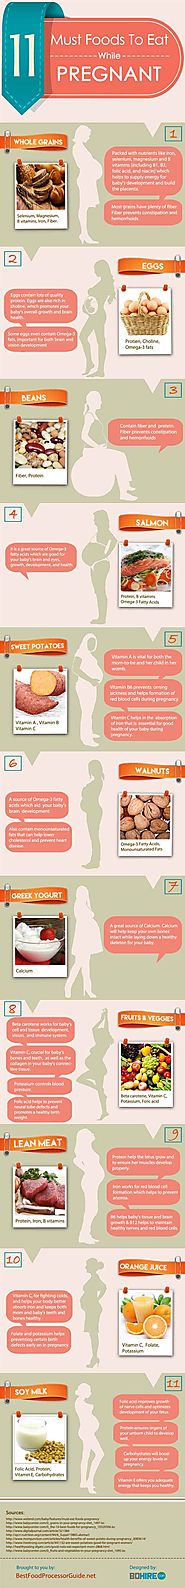 Foods to Eat While Pregnant